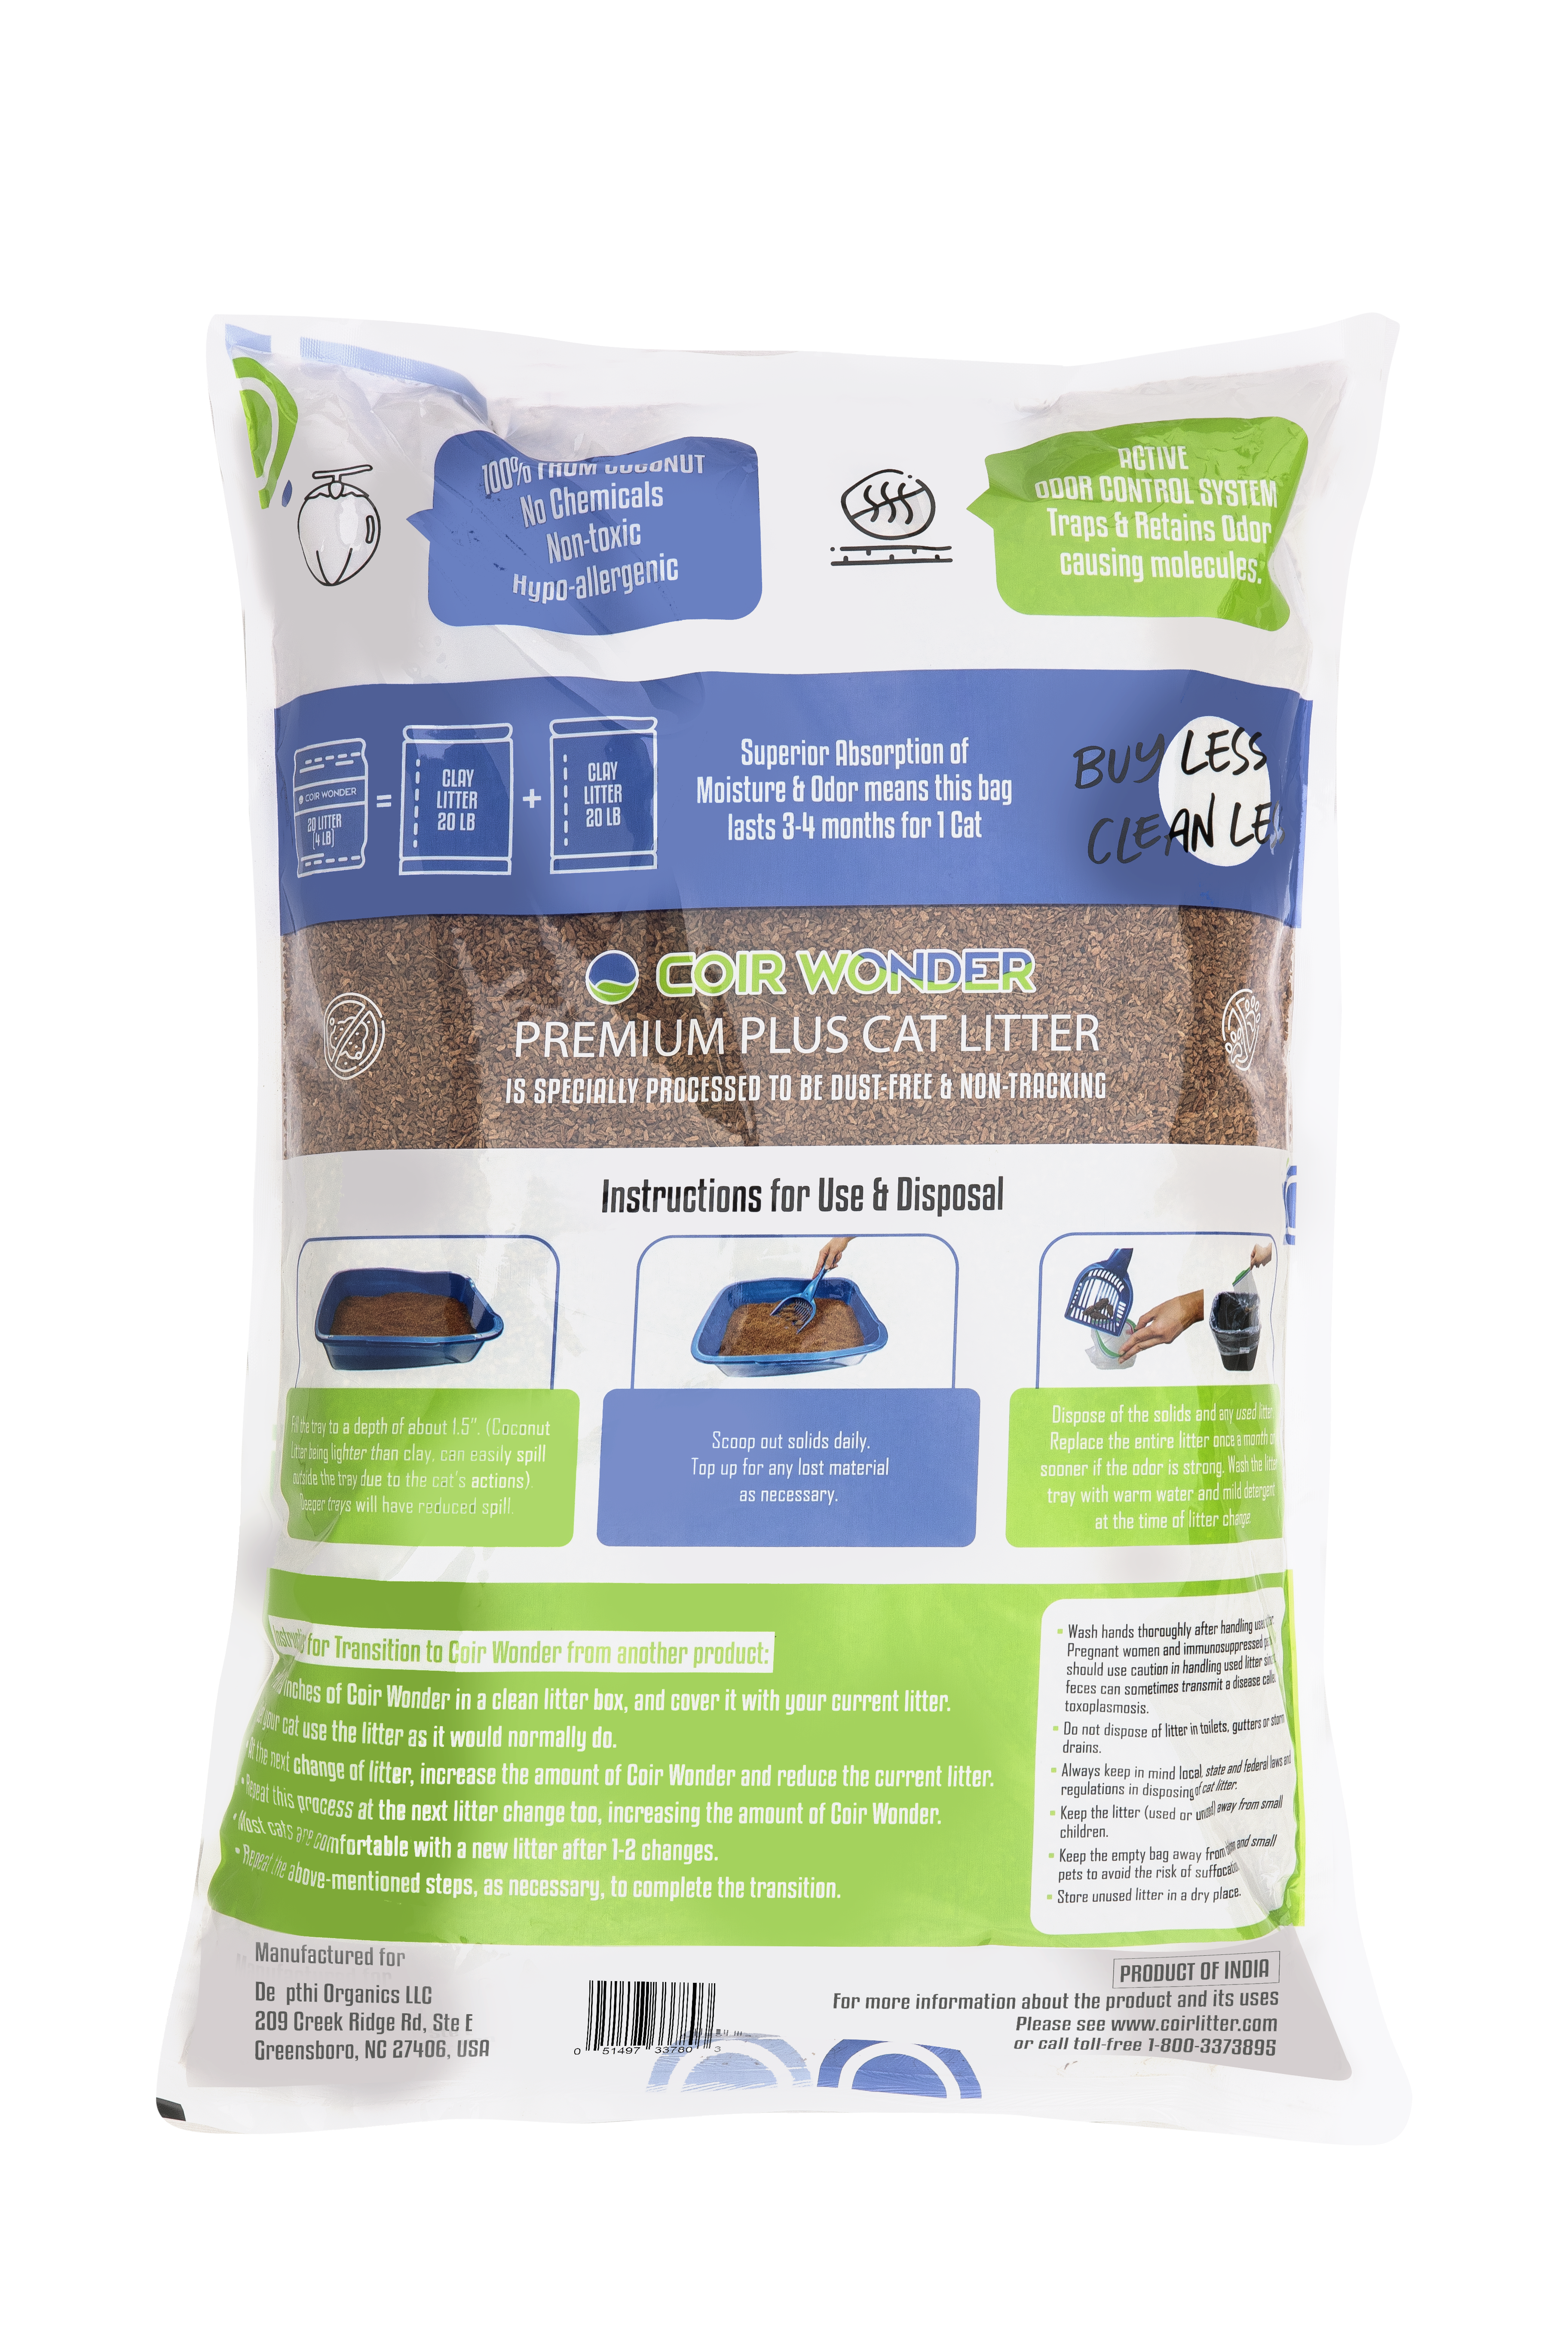 Coir Wonder Coconut Cat Litter (20L) - Natural, Organic and Non-toxic